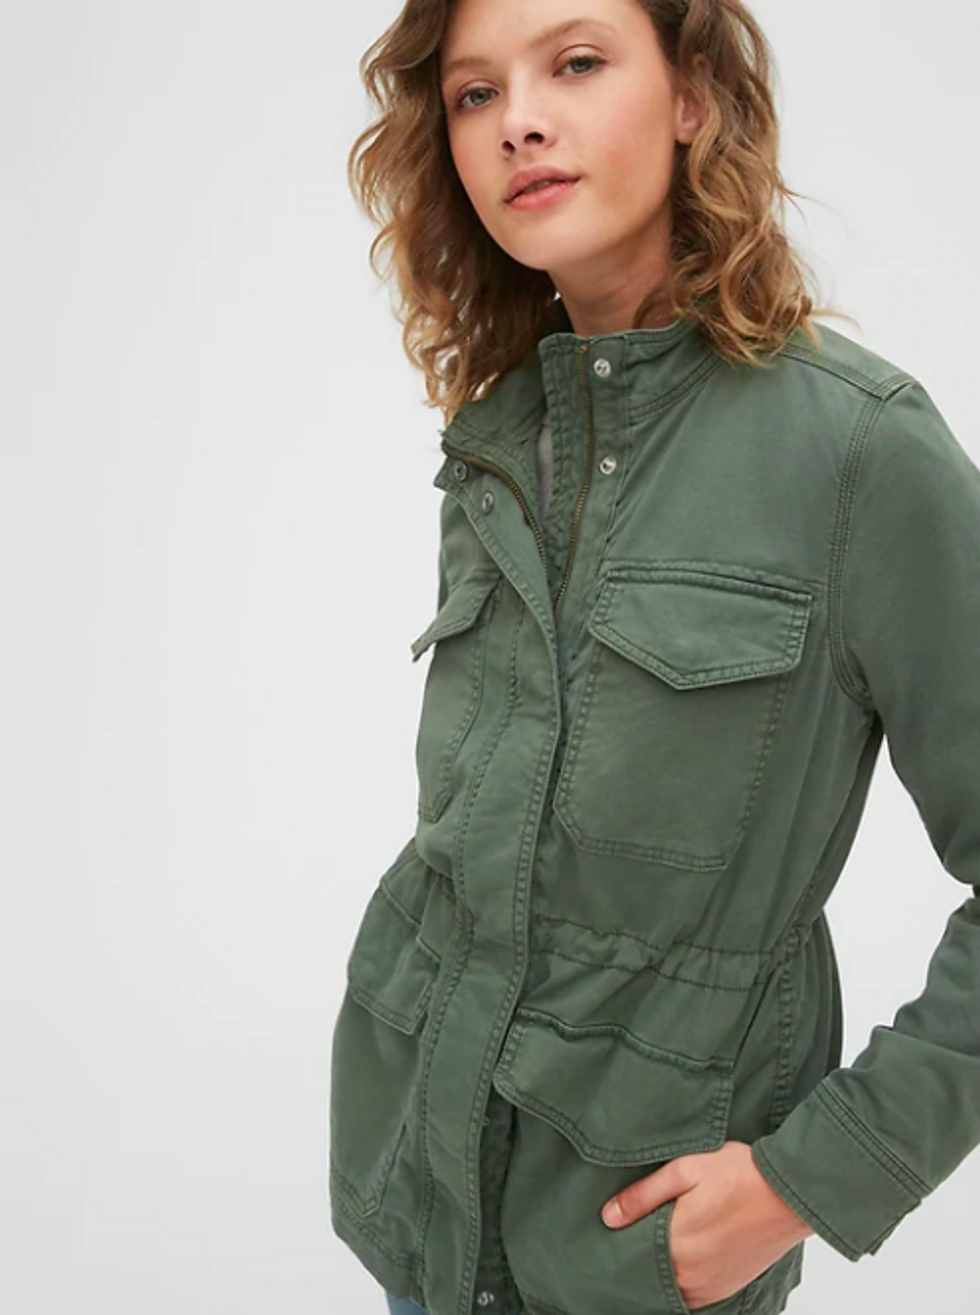 11 Labor Day Sales to Stock Up on Cozy Fall Fashion - Brit + Co